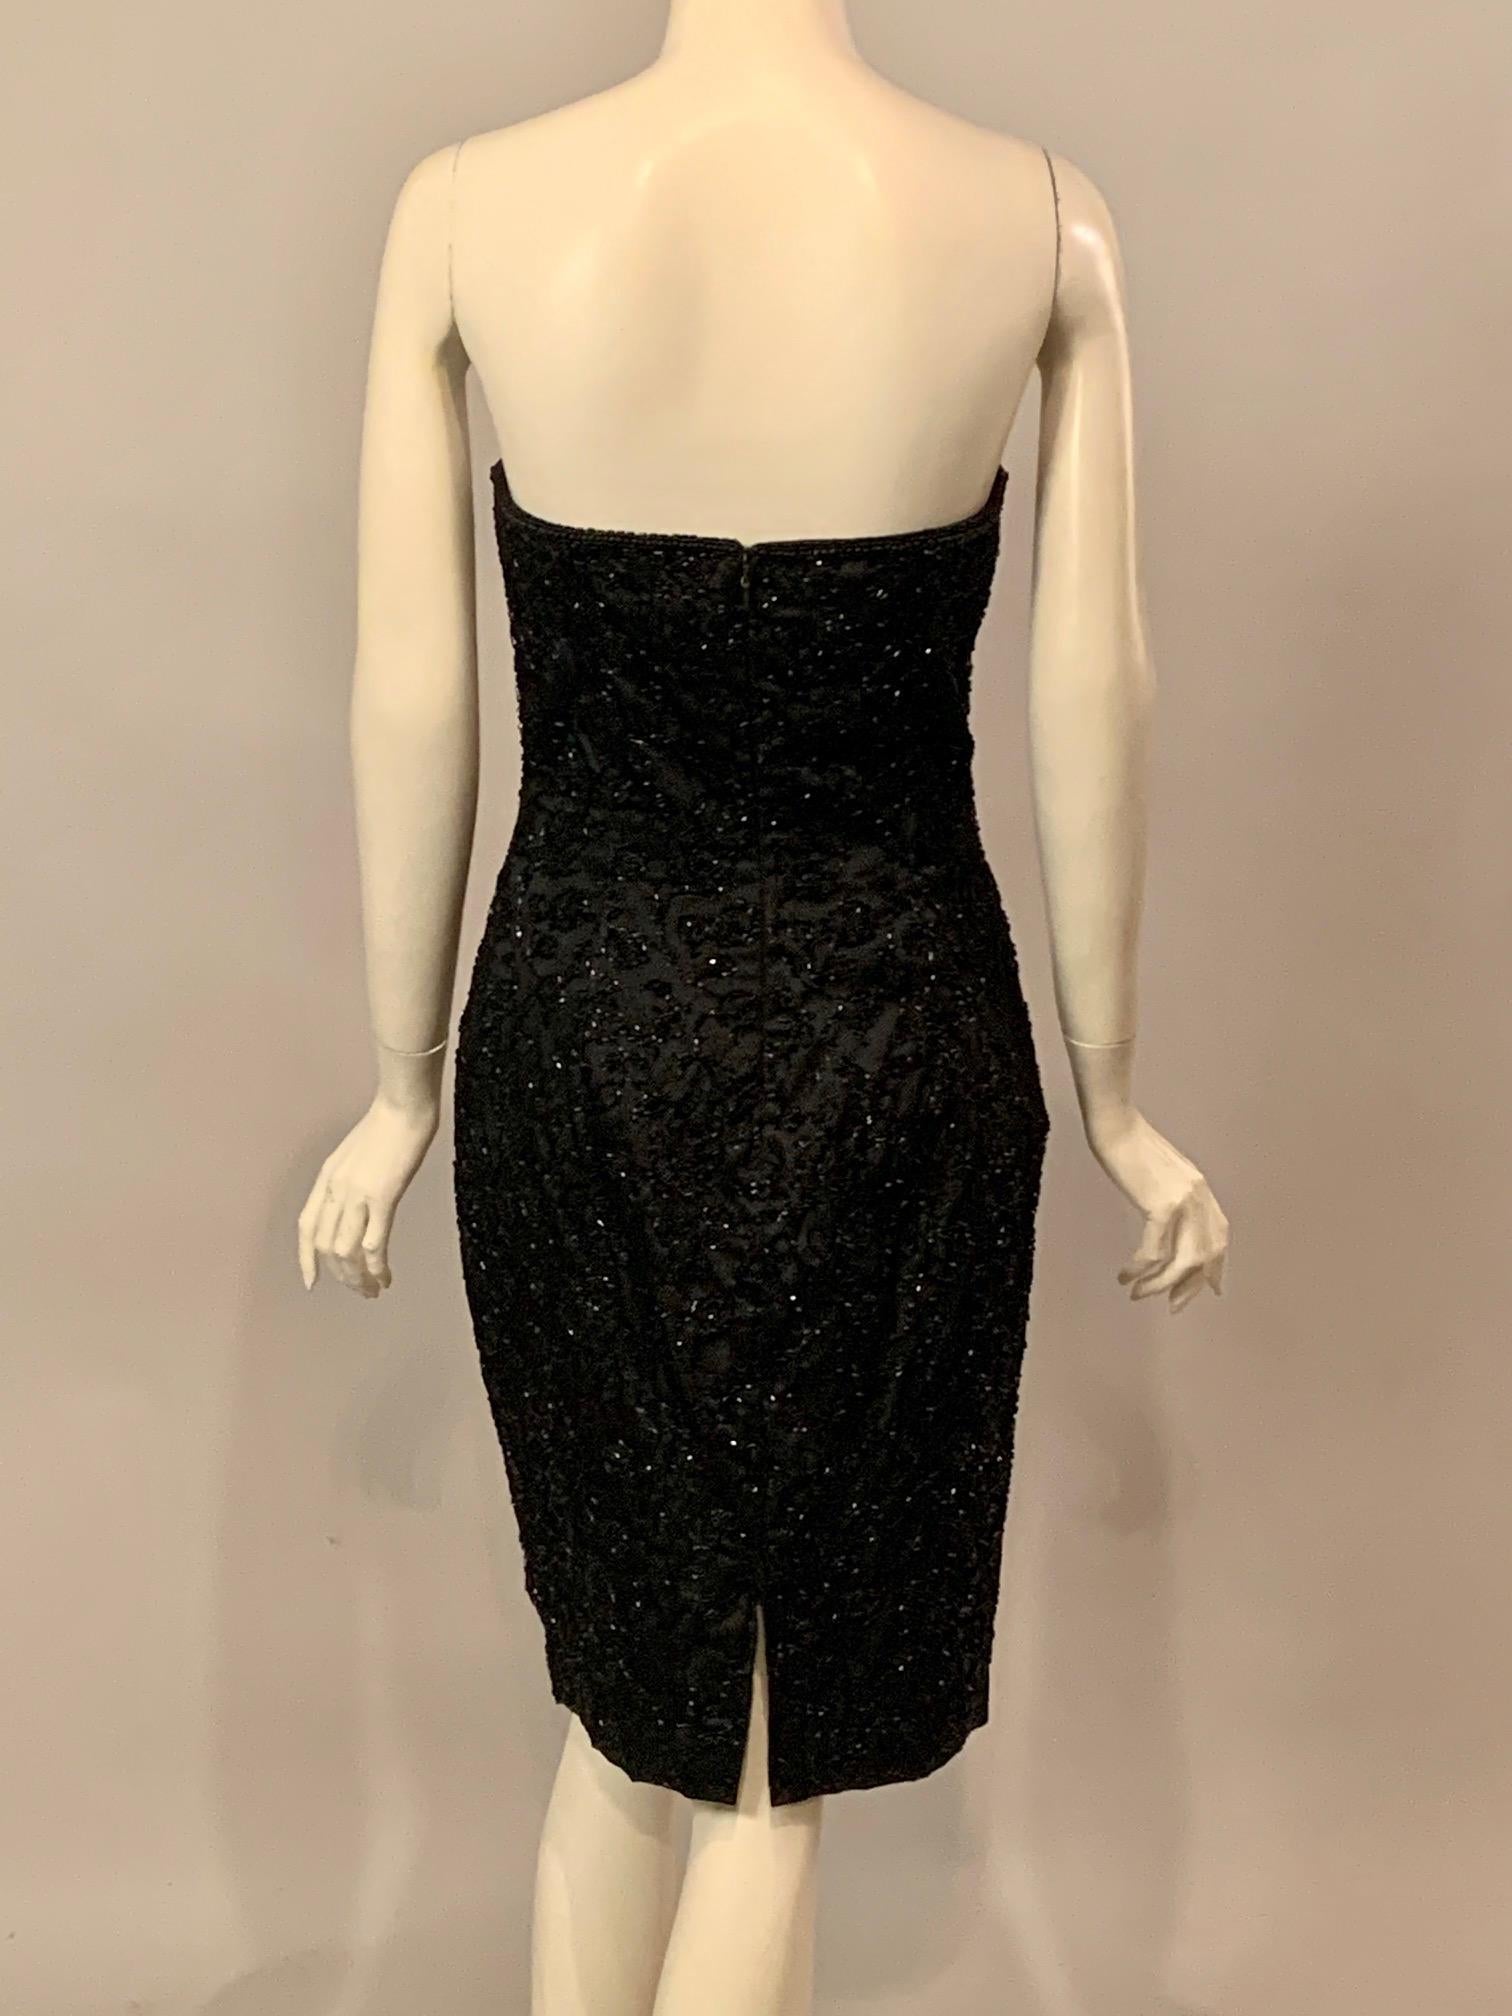 Elaborately Beaded Strapless Black Cocktail Dress and Jacket  circa 1950 For Sale 2